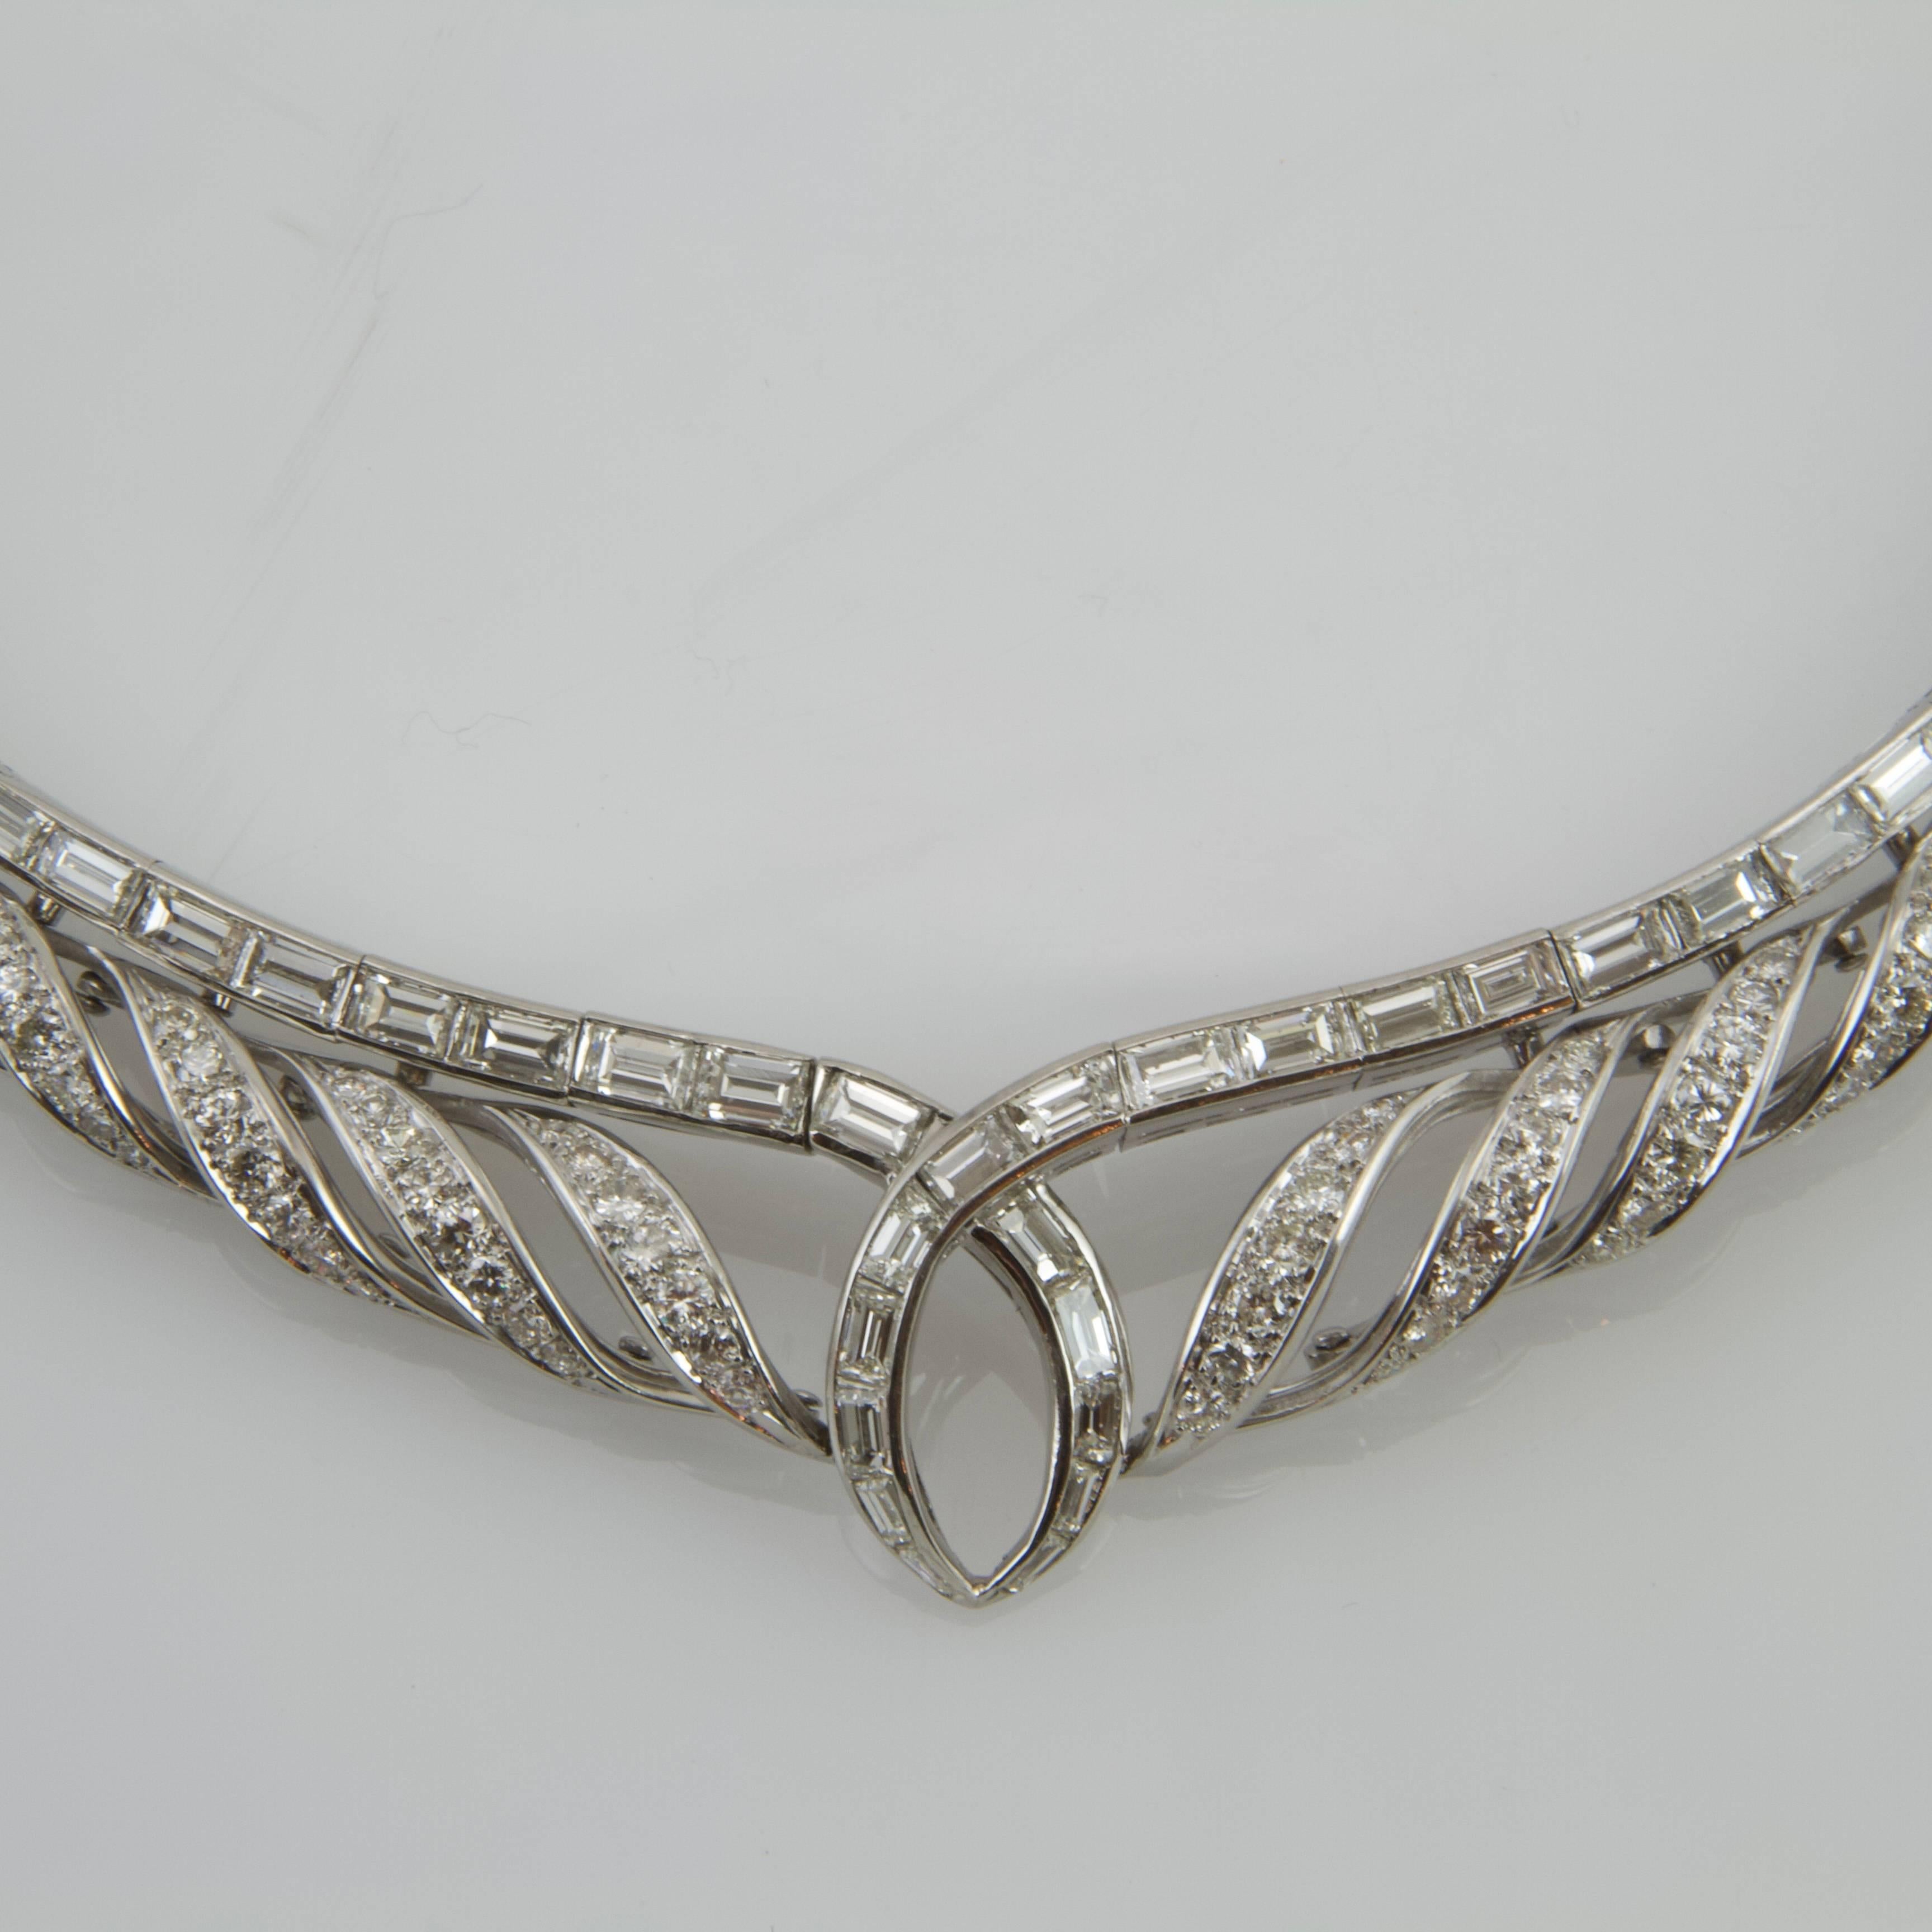 18kt white gold and platinum waterfall patterned necklace. Each volute turned into a spiral set with brilliant cut diamond. The core pattern is stud with baguette diamond. 
Total weight of diamonds estimated around 18 to 20 carats. 
Great design